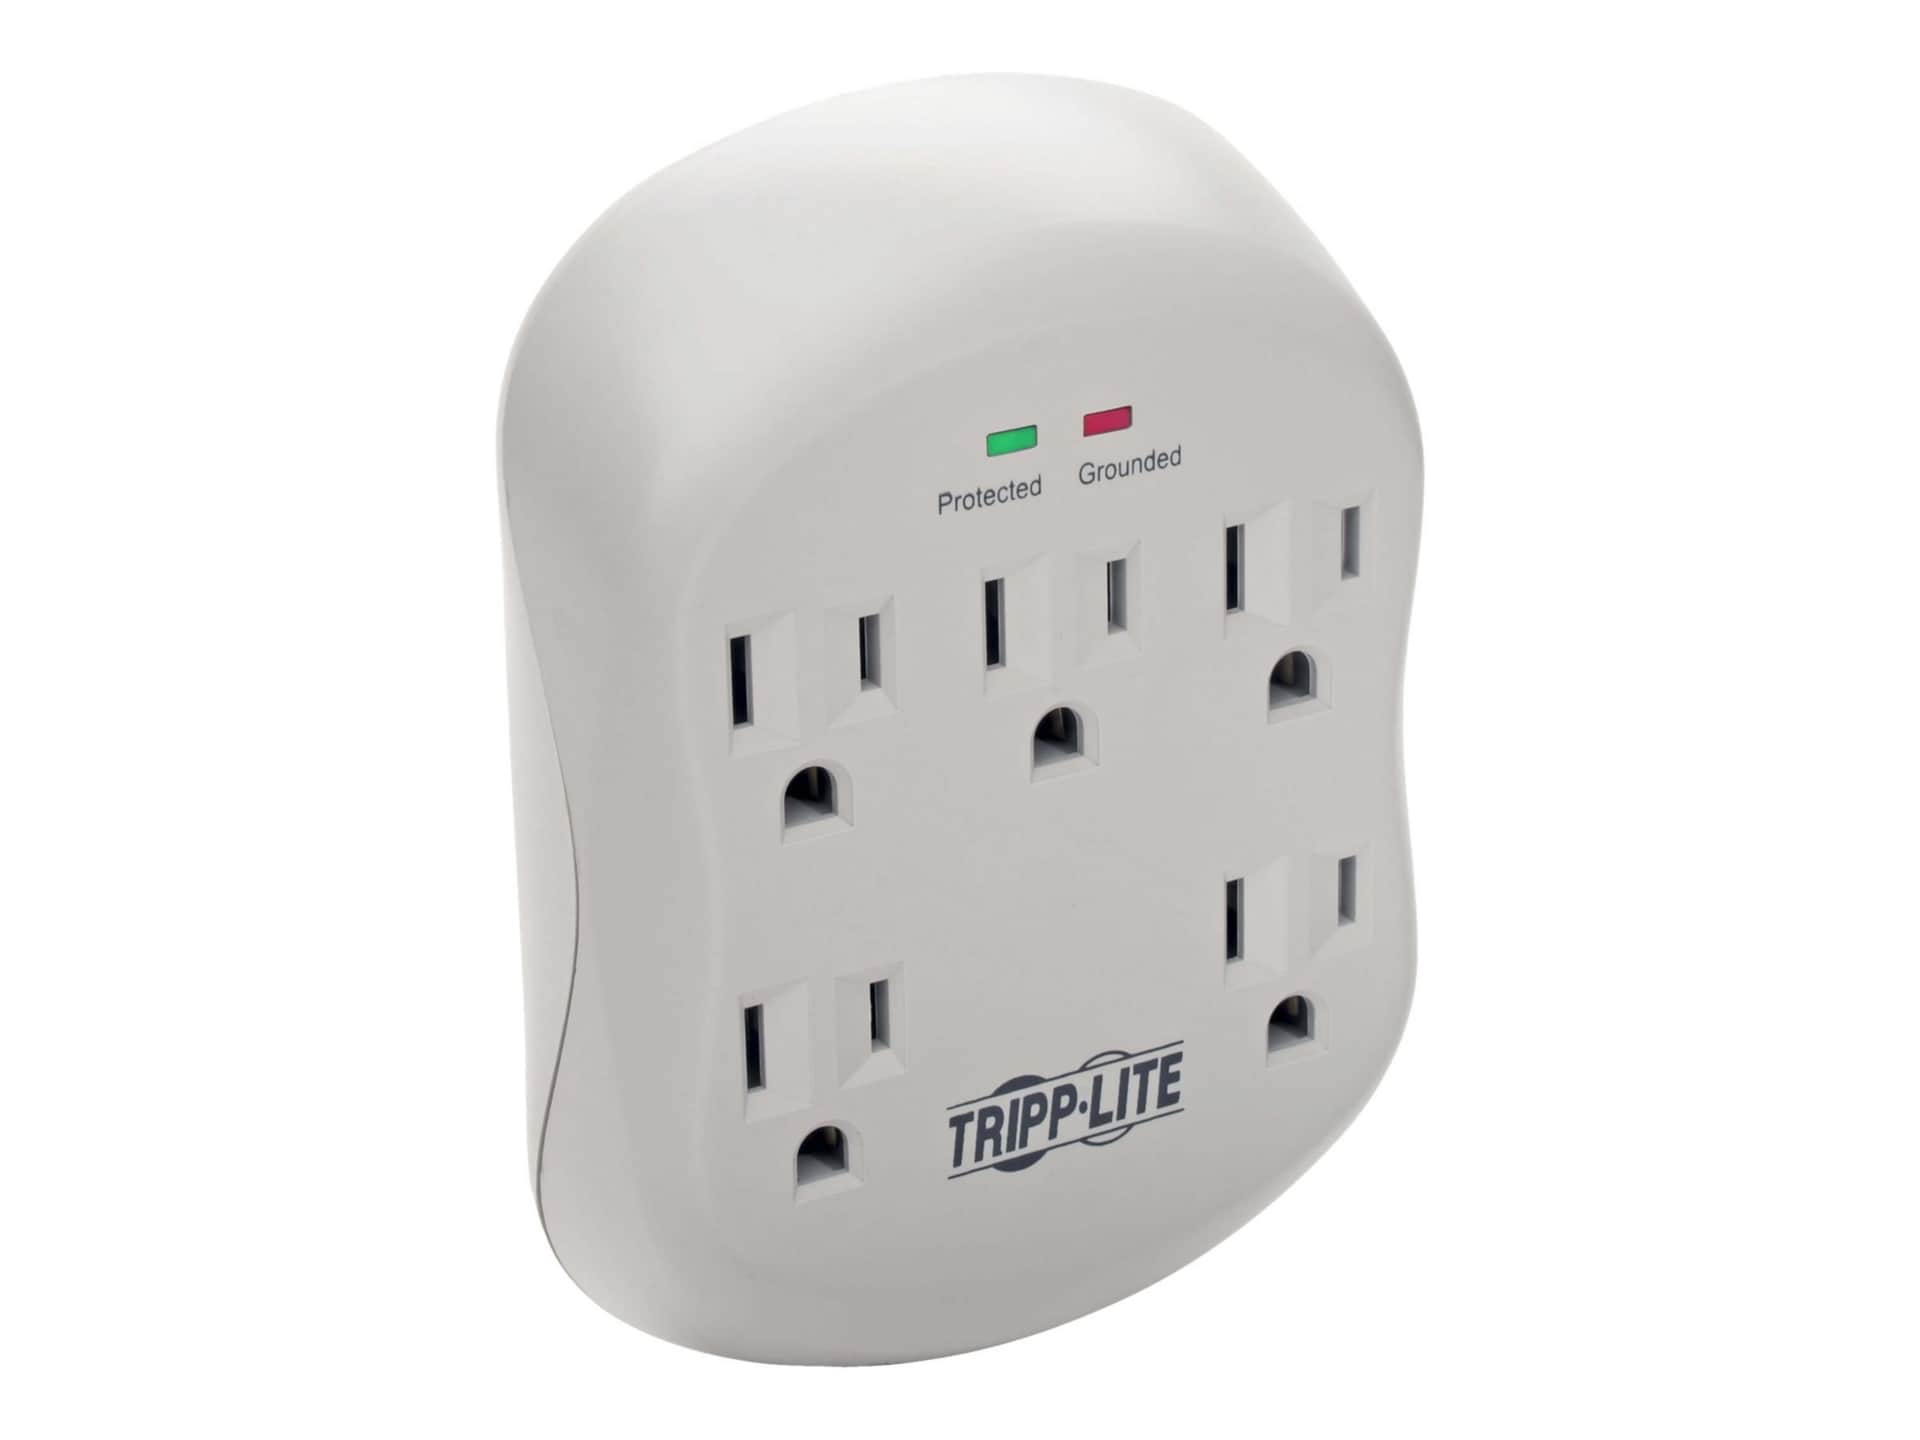 Tripp Lite Surge Protector Wallmount Direct Plug In 5 Outlet RJ11 1080 Joules - surge protector - 1875 Watt